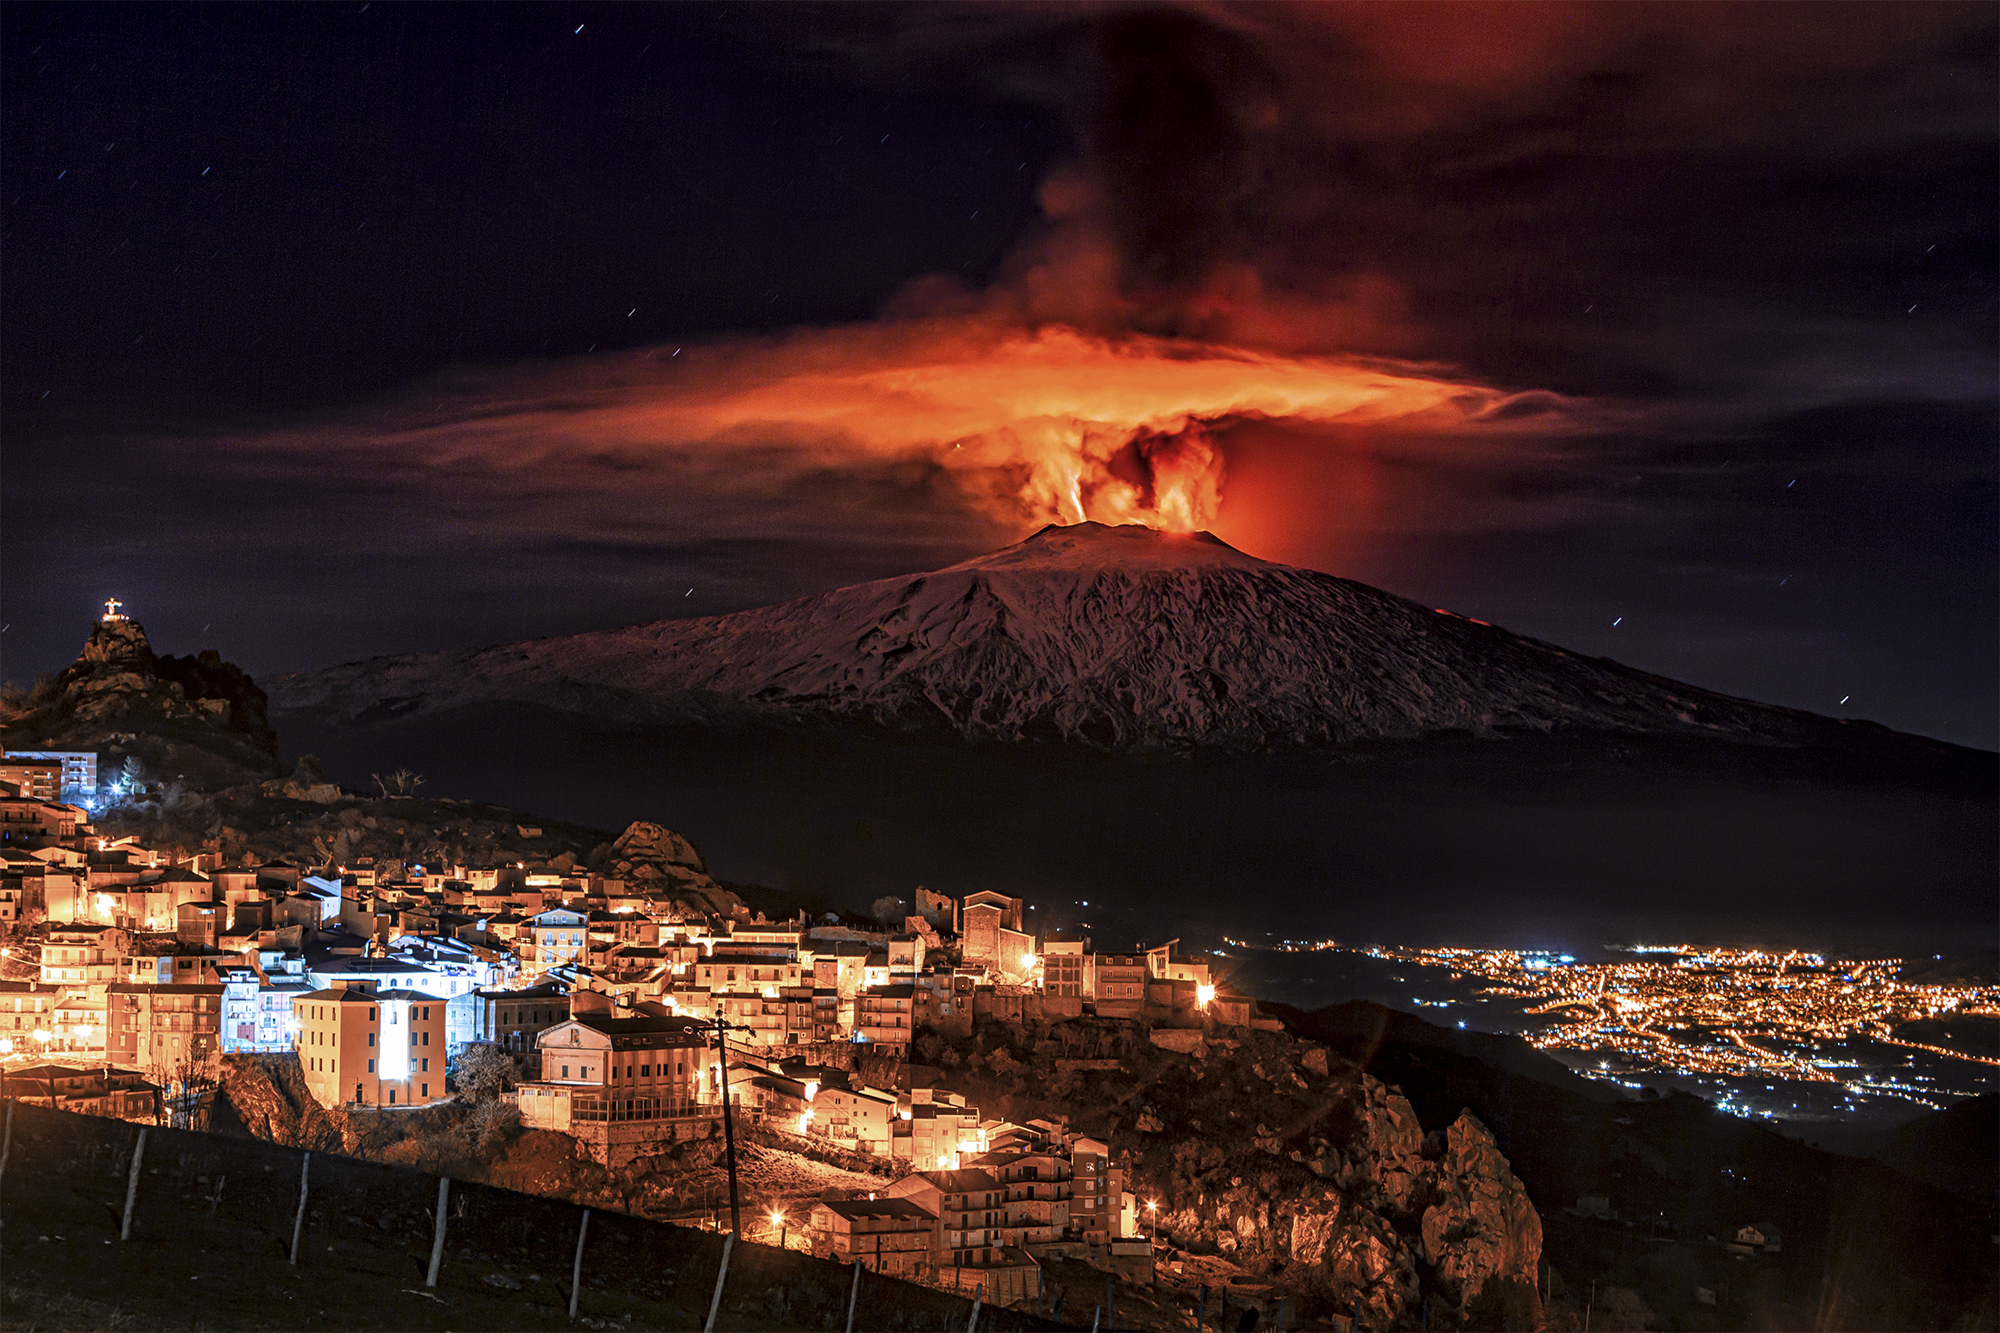 This night eruption of the Etna volcano was taken from San Teodoro at 2 am. Three eruptive vents are seen, which simultaneously eject columns of lava up to 1000 metres high. The town in the foreground is Cesarò, and the lights at the bottom are from the municipality of Bronte.